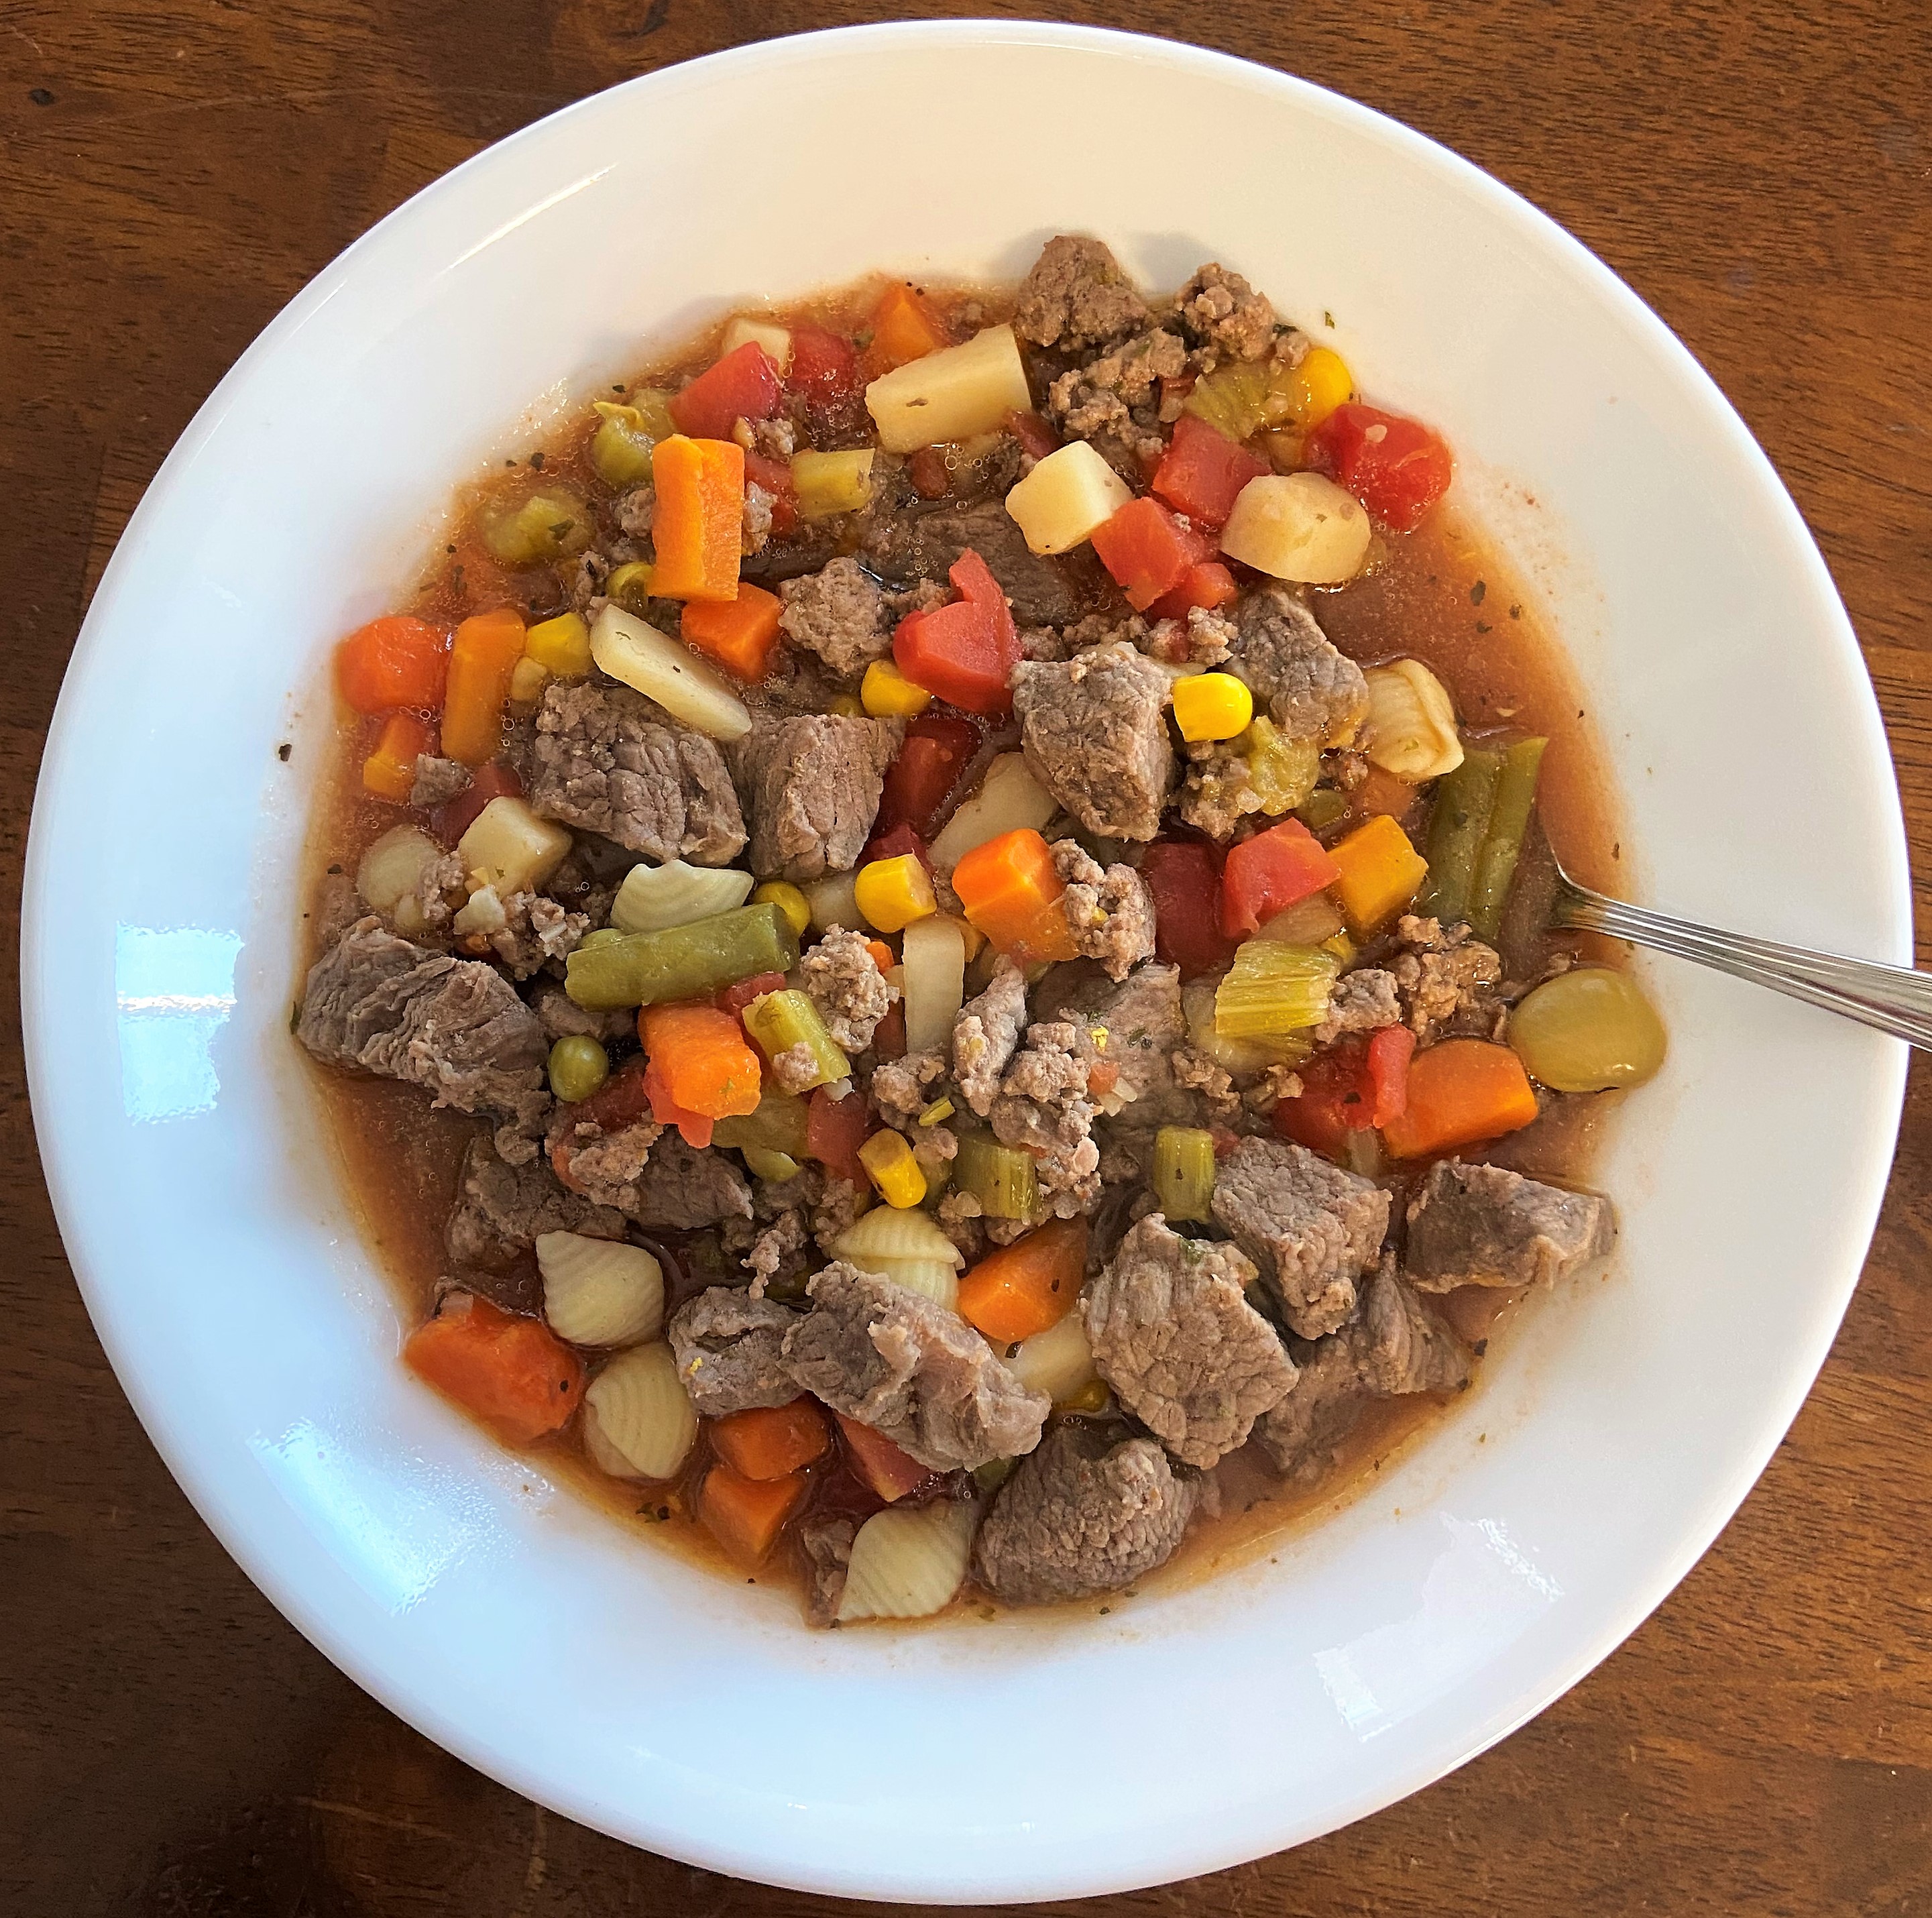 once your vegetable beef soup is cooked, pour some into a bowl and enjoy